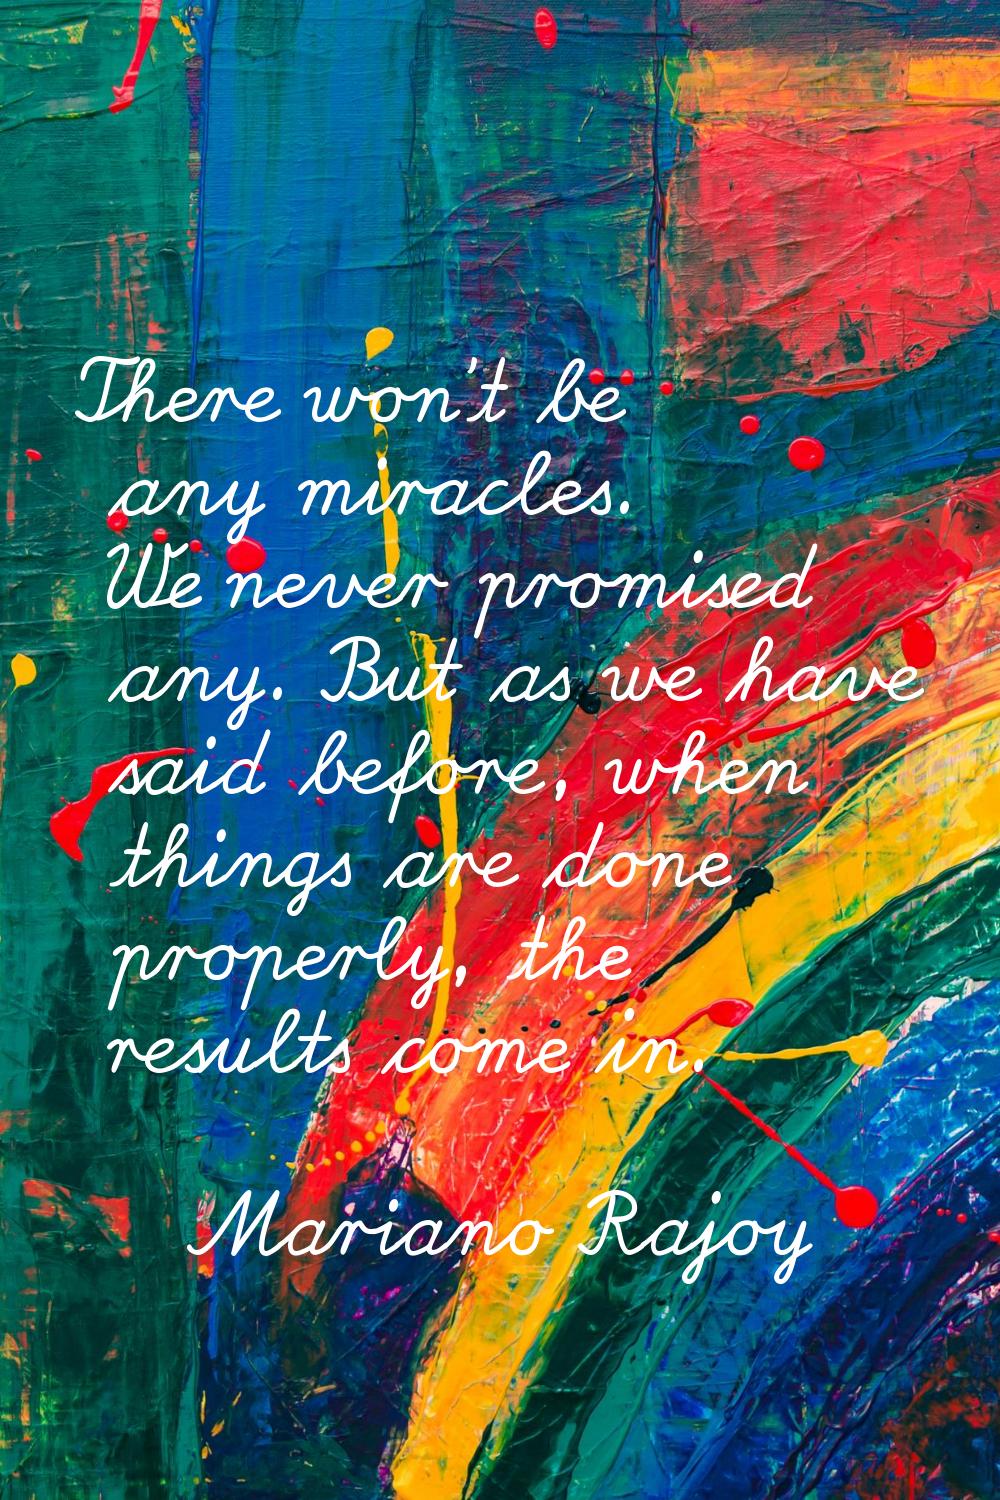 There won't be any miracles. We never promised any. But as we have said before, when things are don